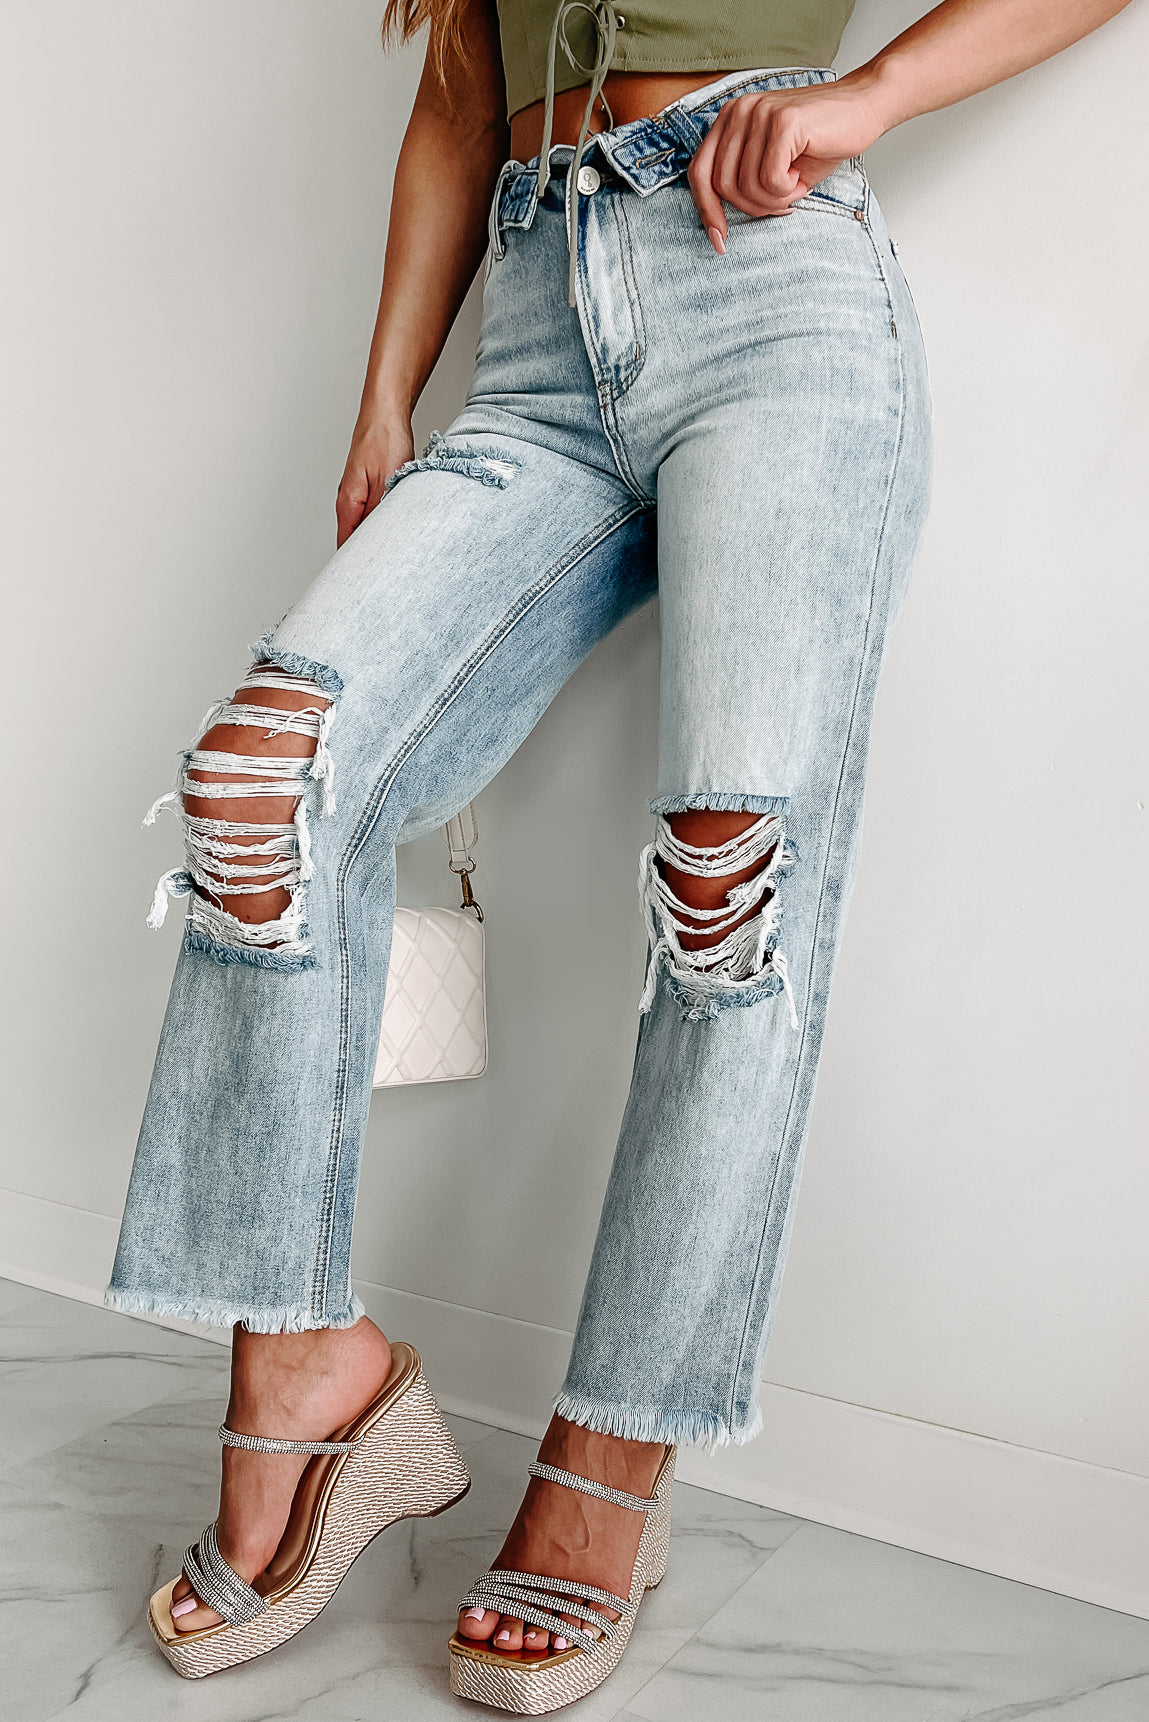 PacSun Light Wash High Rise Mom Jeans, size 26